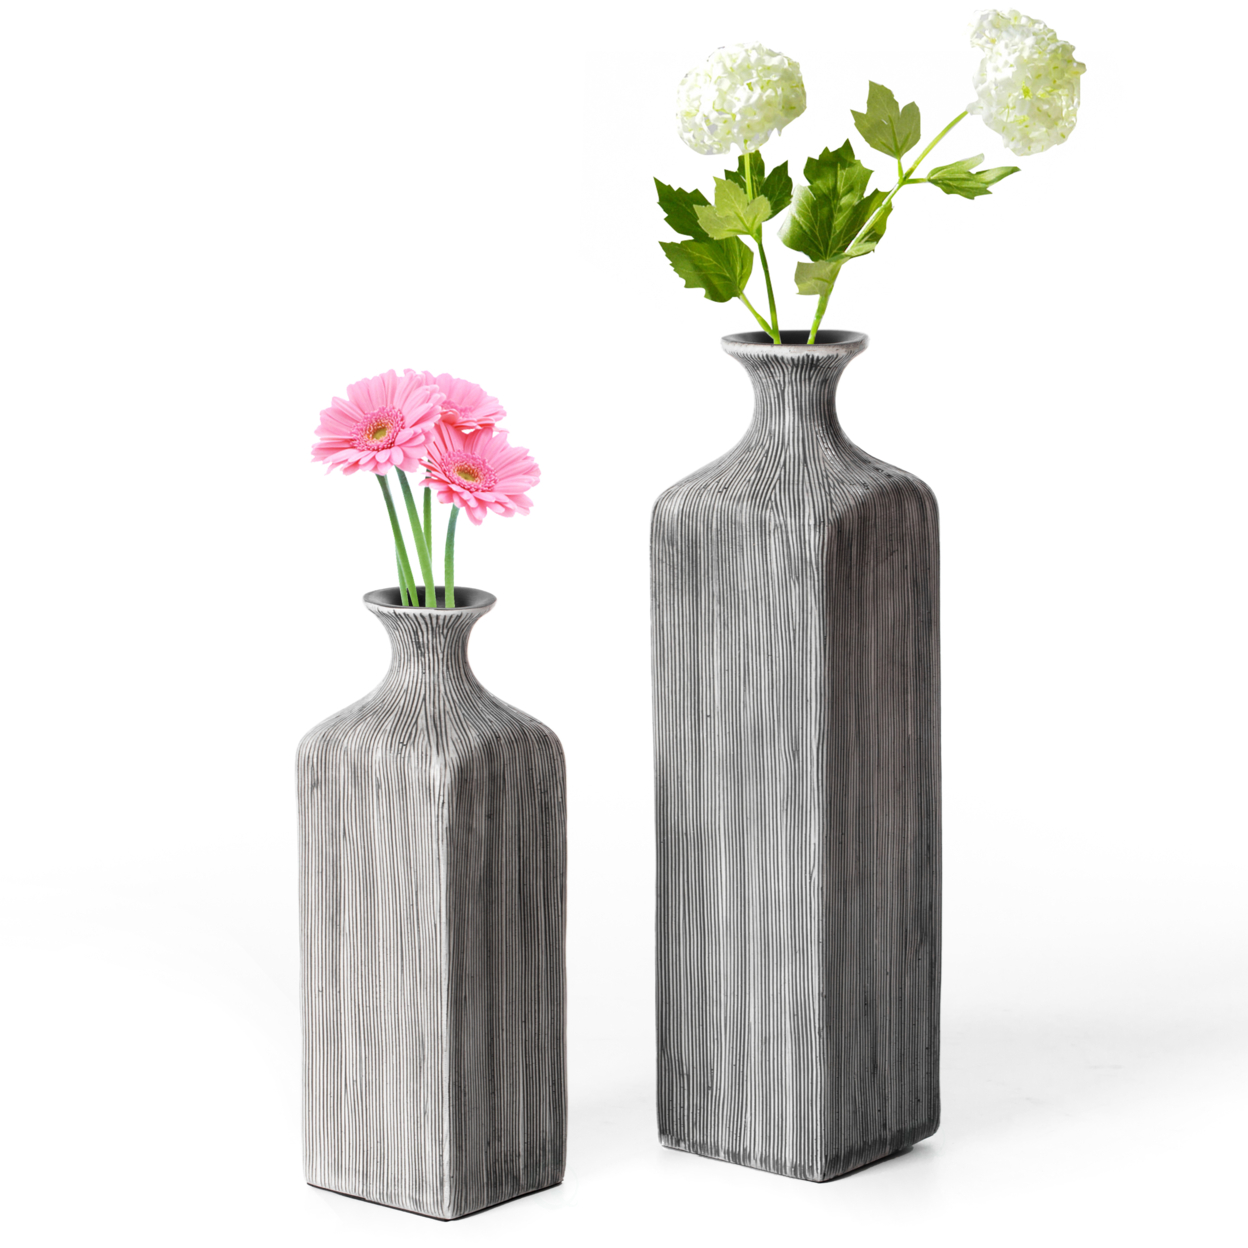 Contemporary Decorative Square Table Flower Vase With Gray Striped Design - Set Of 2